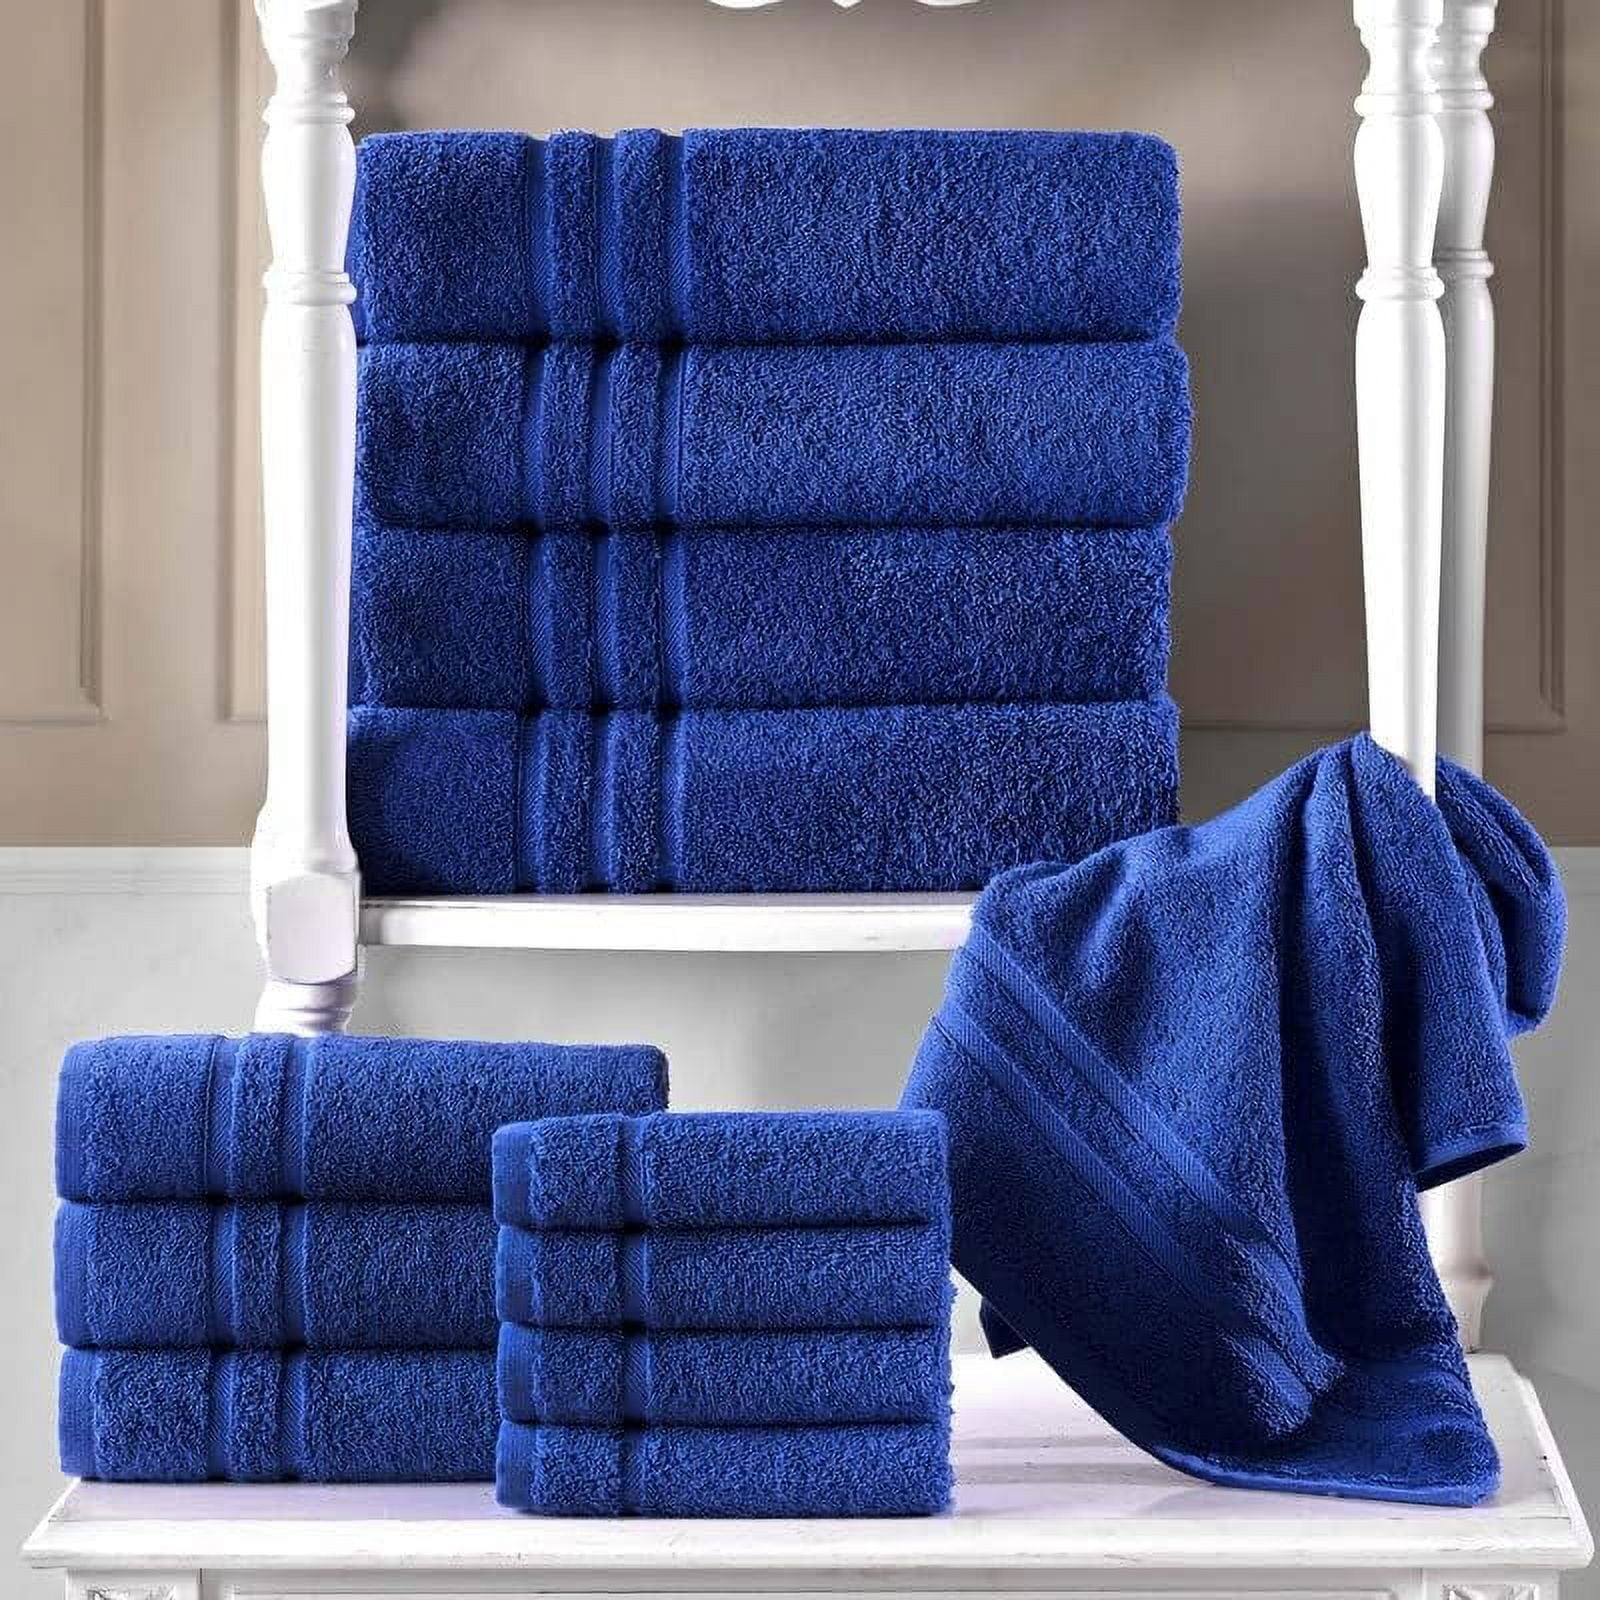 4 PIECE LUXURY LARGE SIZE BATH TOWEL SET FOR HOME HOTEL SPAS GUEST by  Hurbane Home, Navy Blue, 1 - Harris Teeter